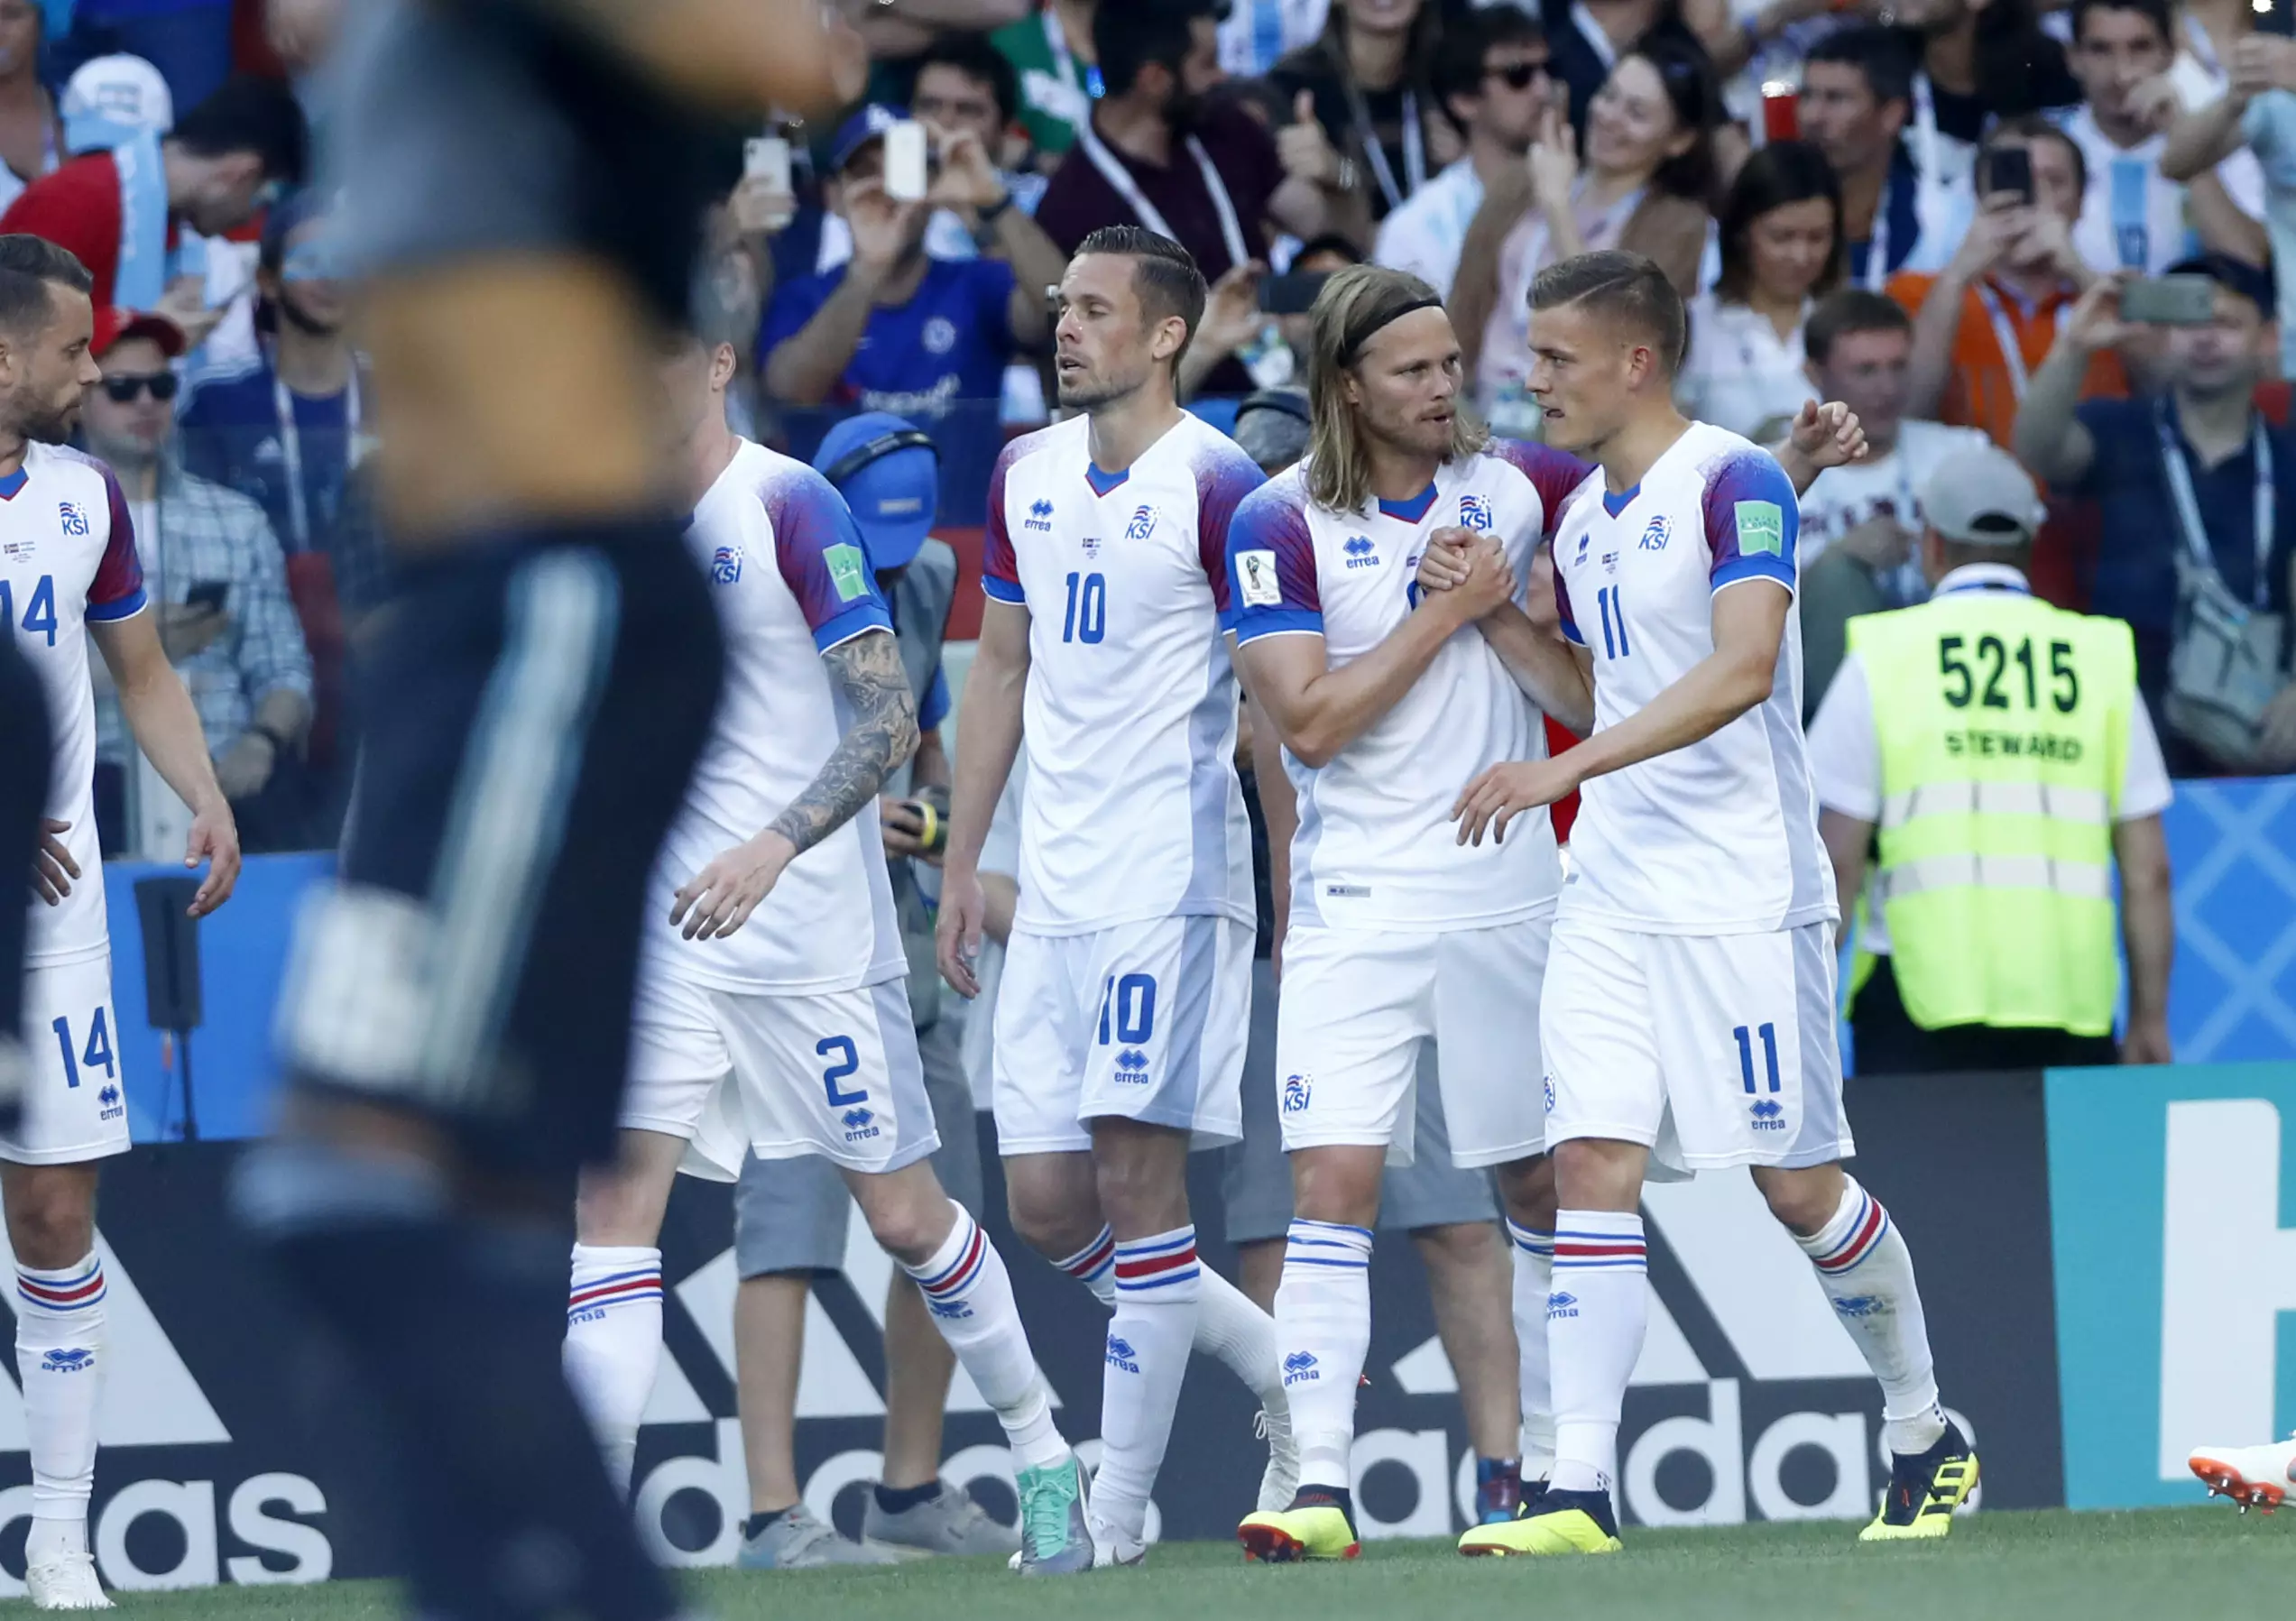 Iceland players celebrate scoring a goal at the World Cup. Image: PA